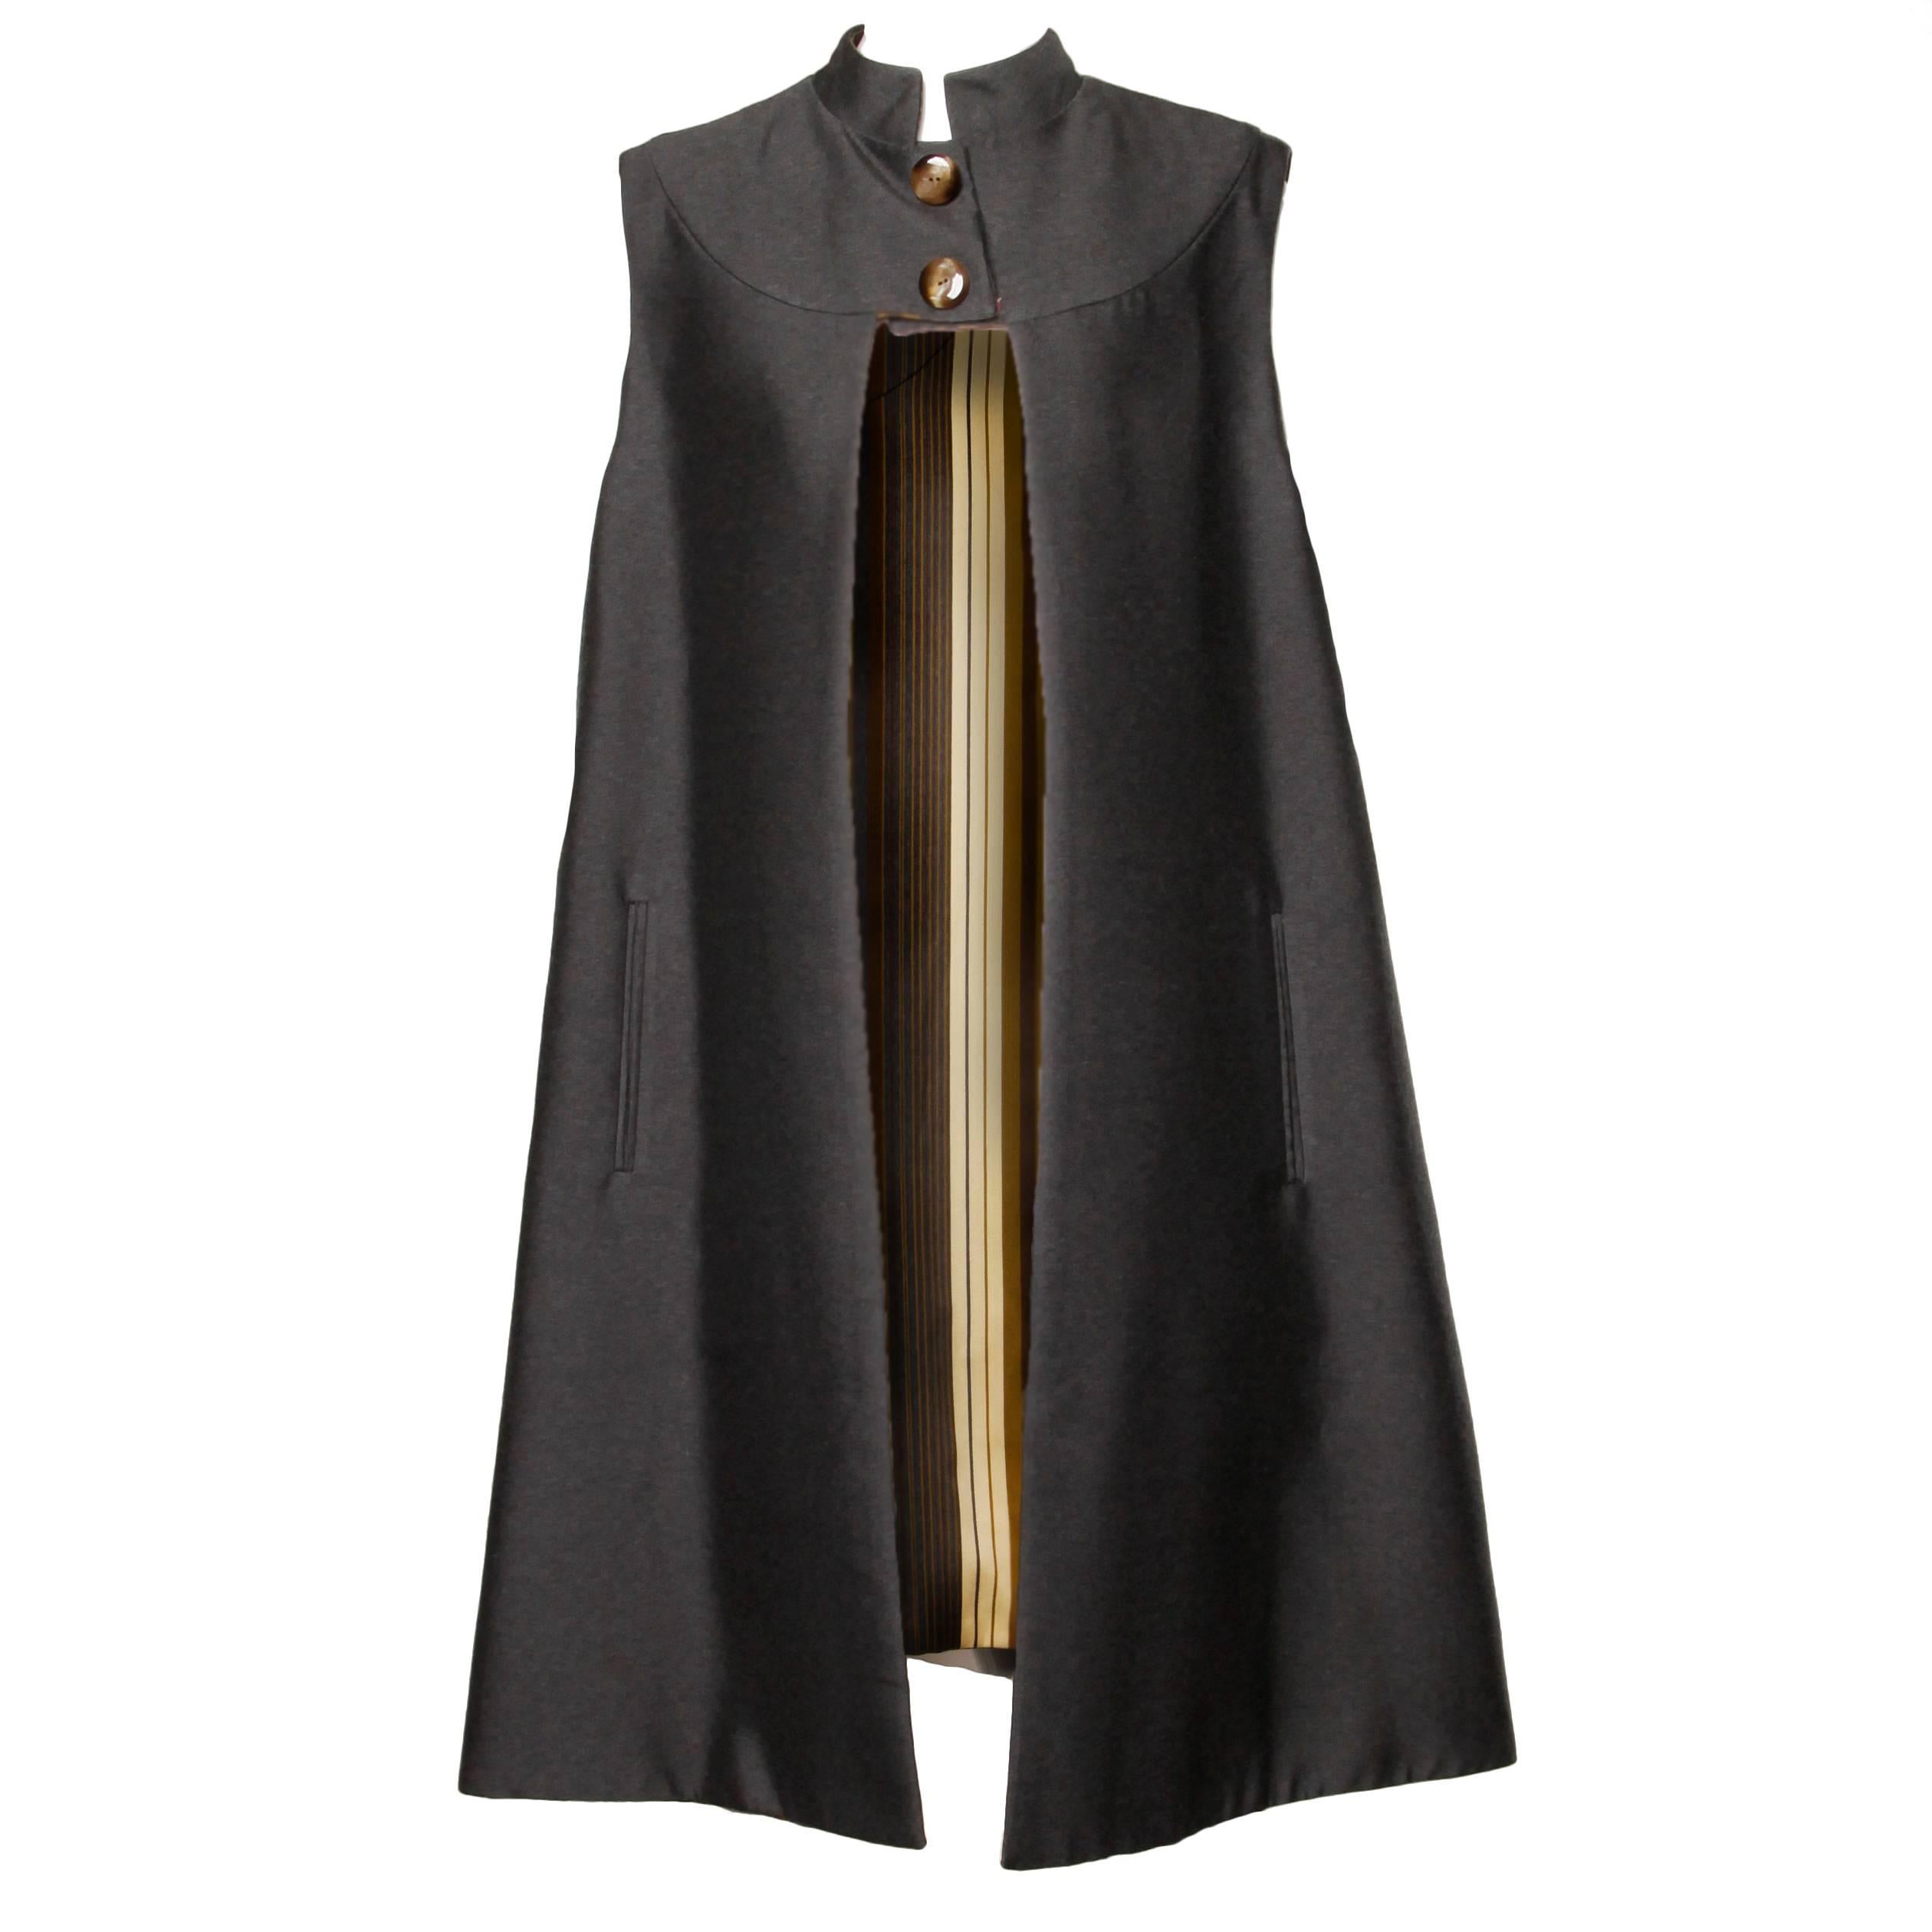 Stunning Mr. Blackwell Vintage 1960s Wool + Silk Cape Coat with Striped Lining For Sale